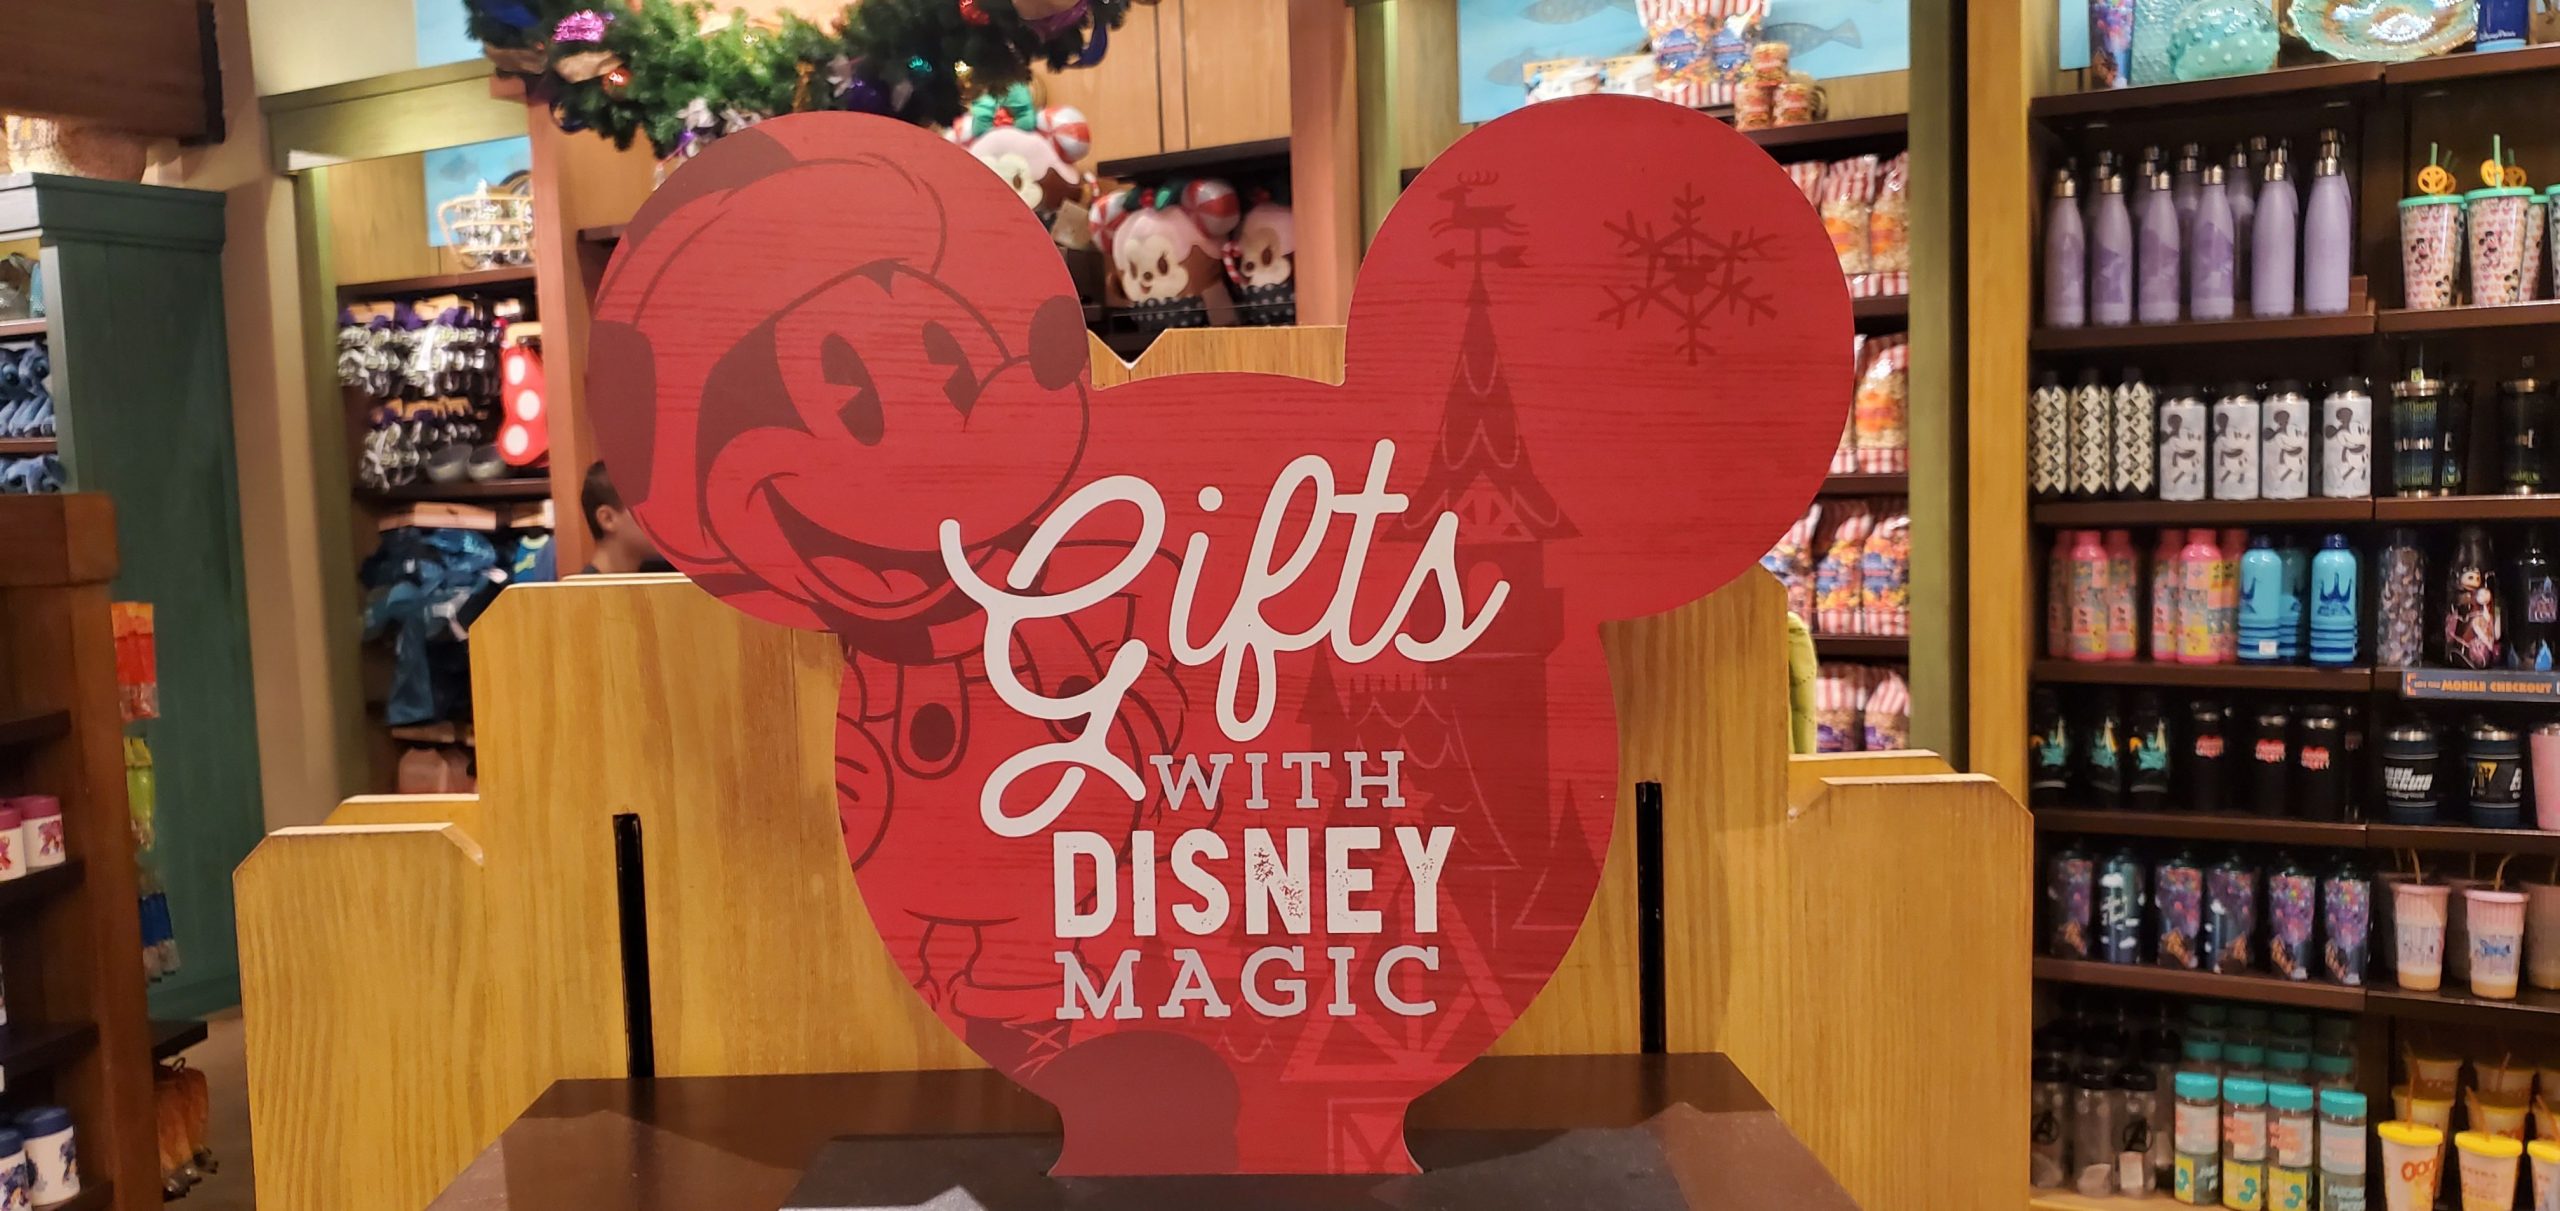 Gifts with disney magic sign